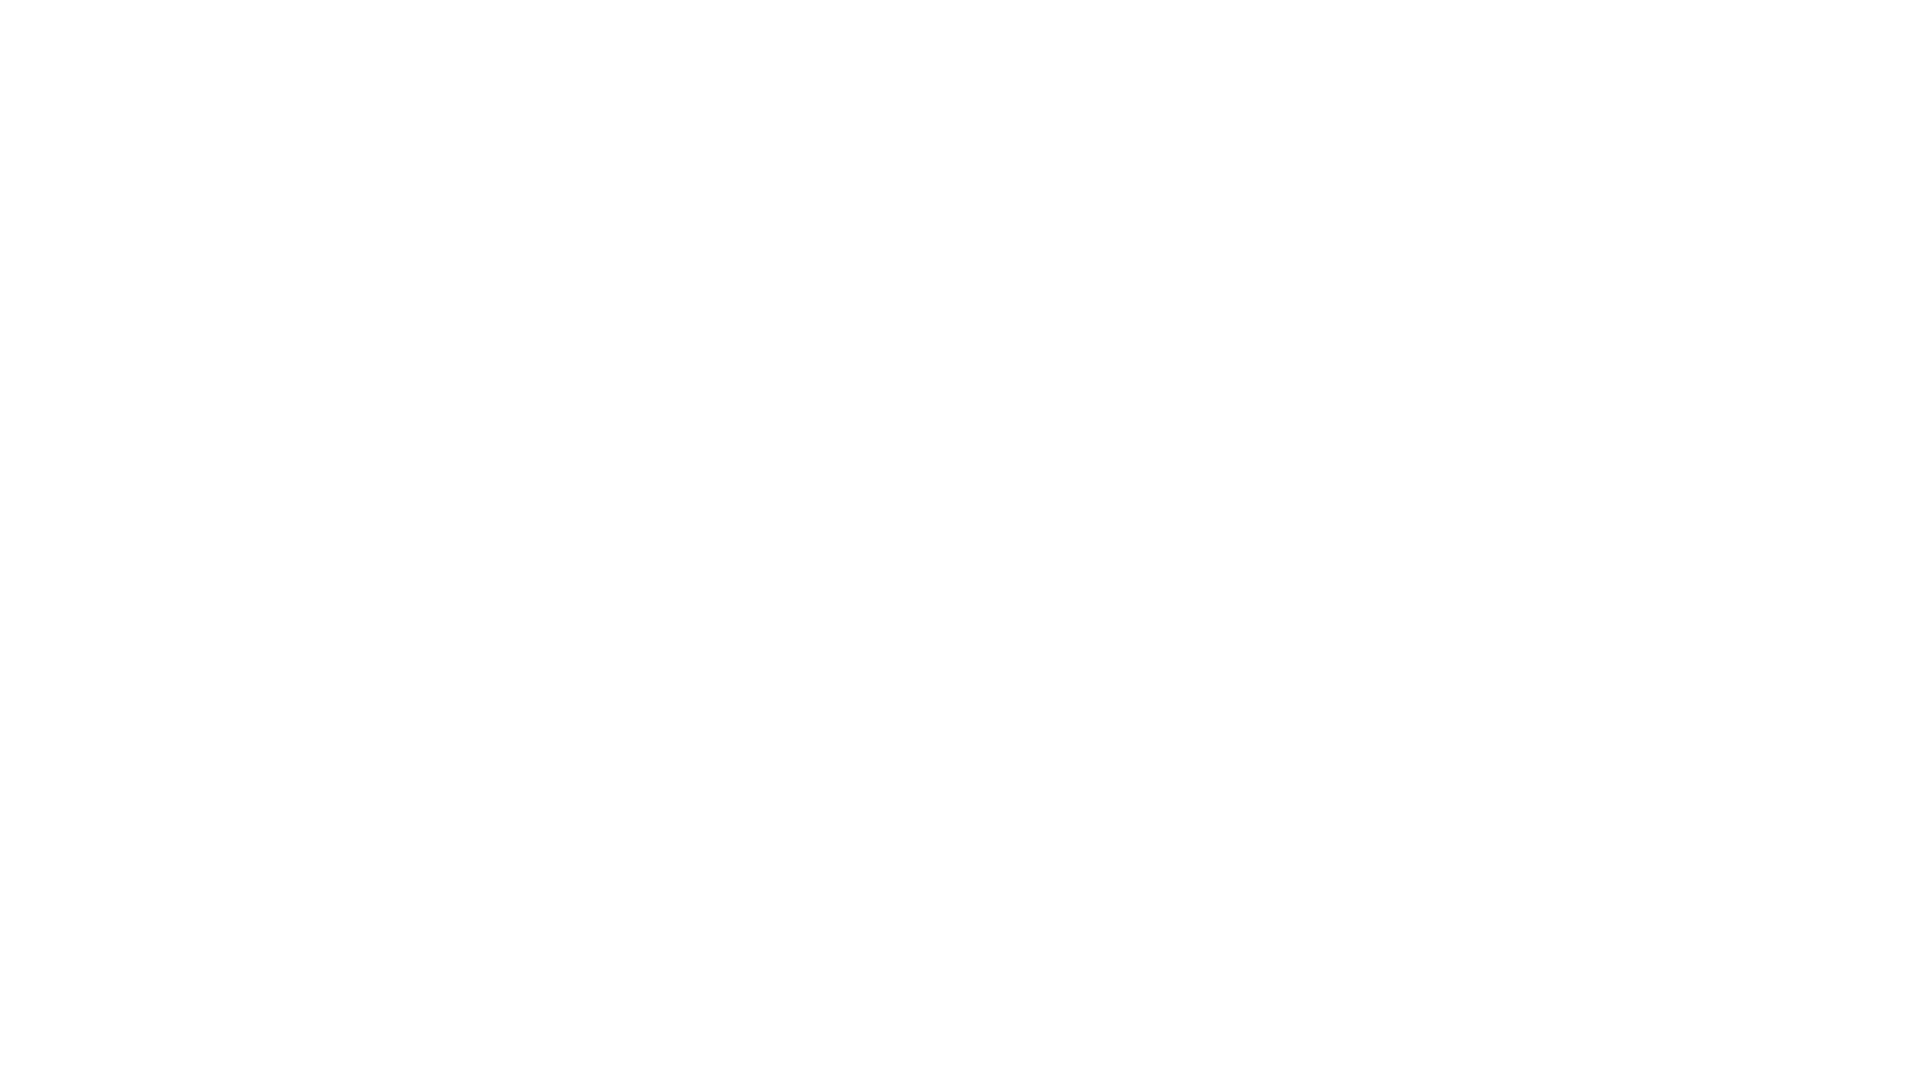 Astronuts